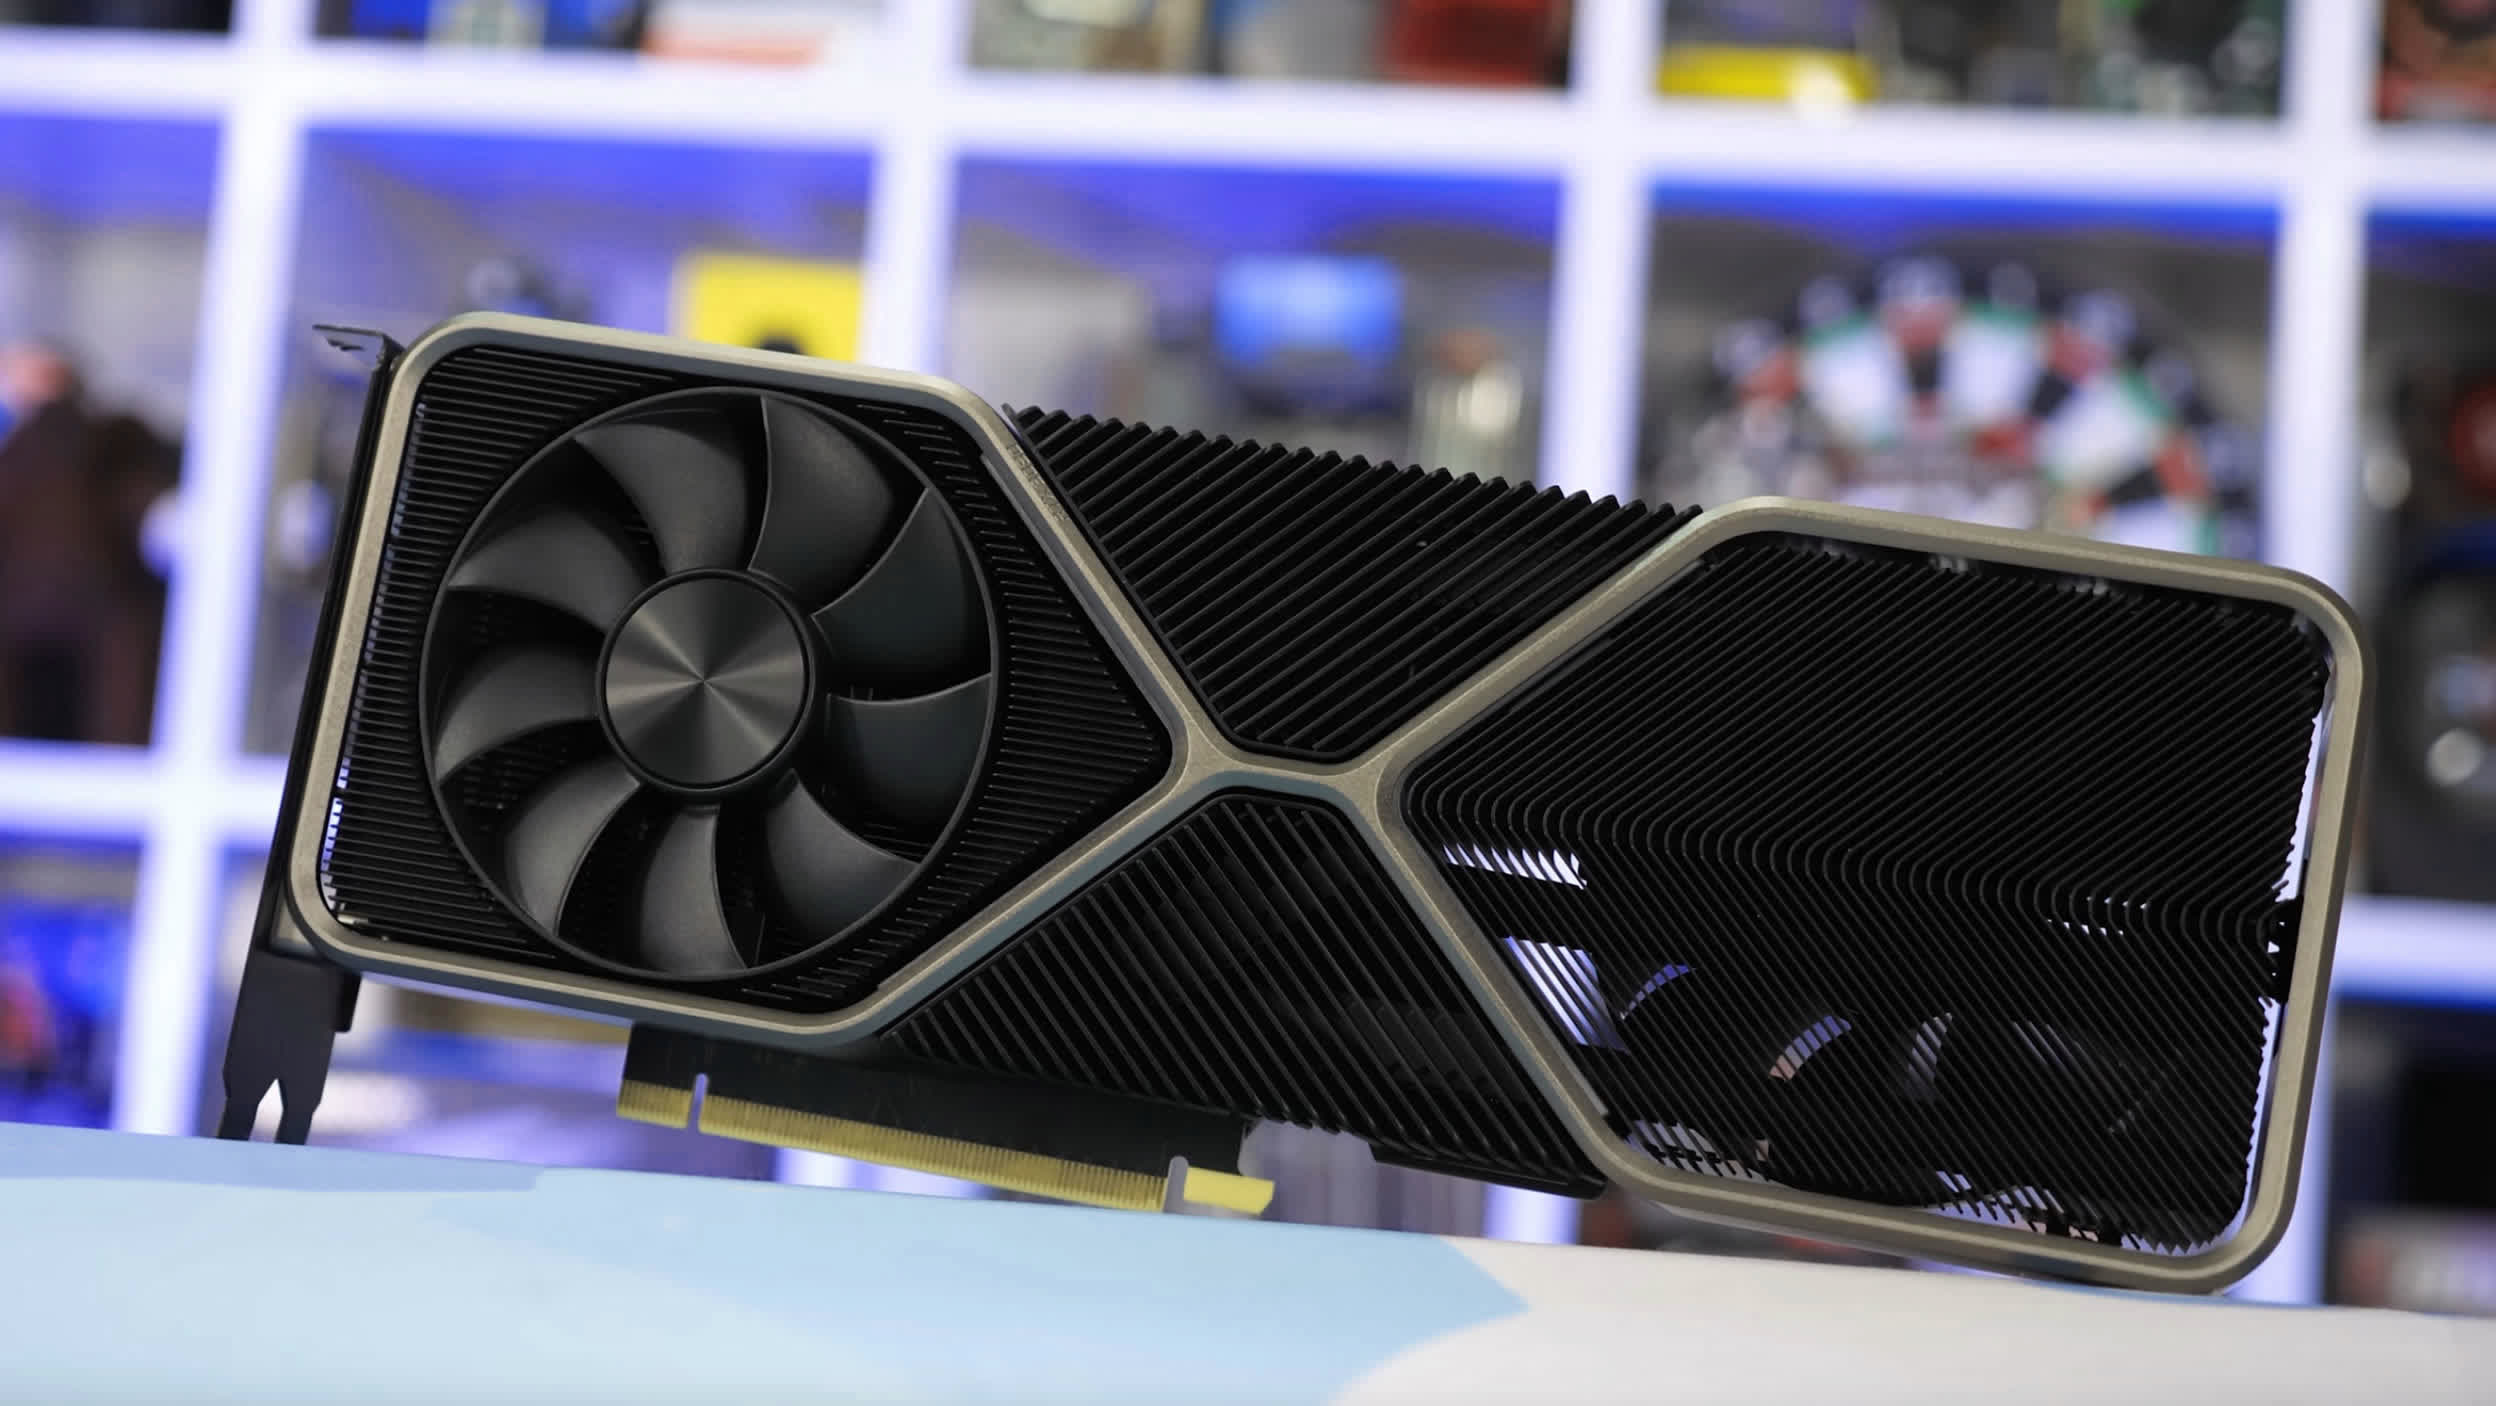 Rumor: Nvidia moves RTX 3080 Ti launch to February because Big Navi offers little threat